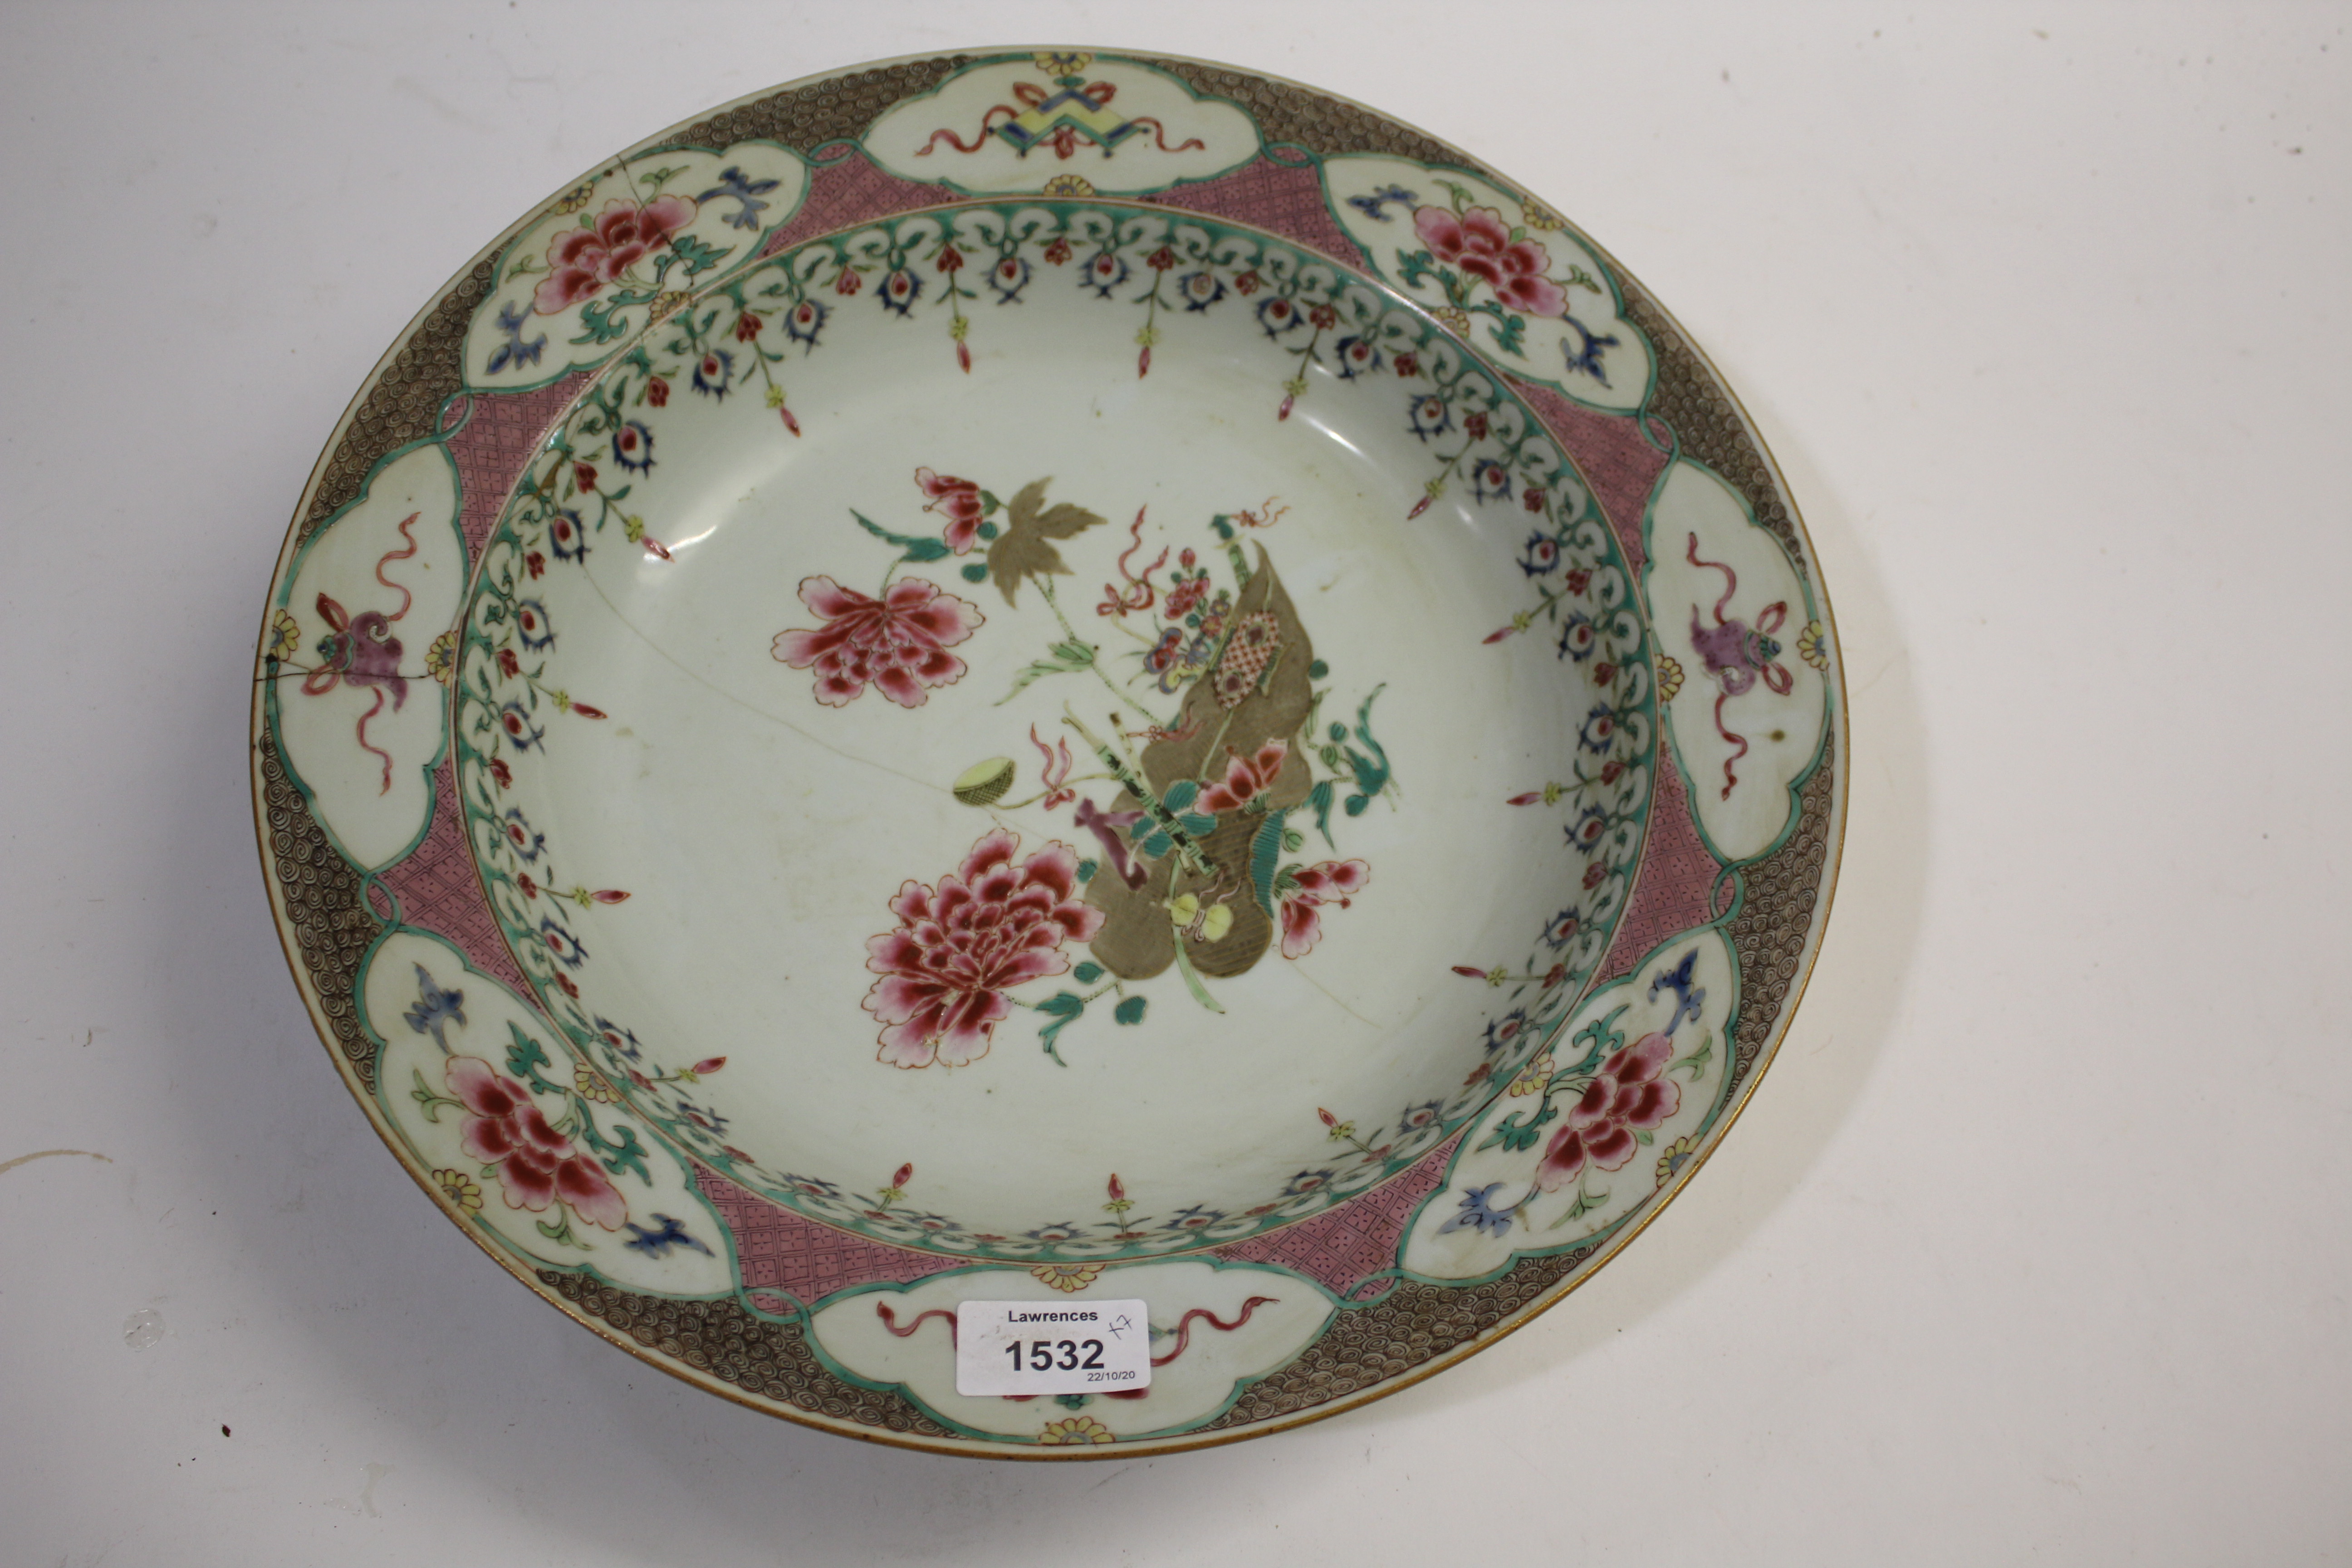 CHINESE FAMILLE ROSE DISH 19th century, enamelled with flowers inside a border with floral and - Image 15 of 19